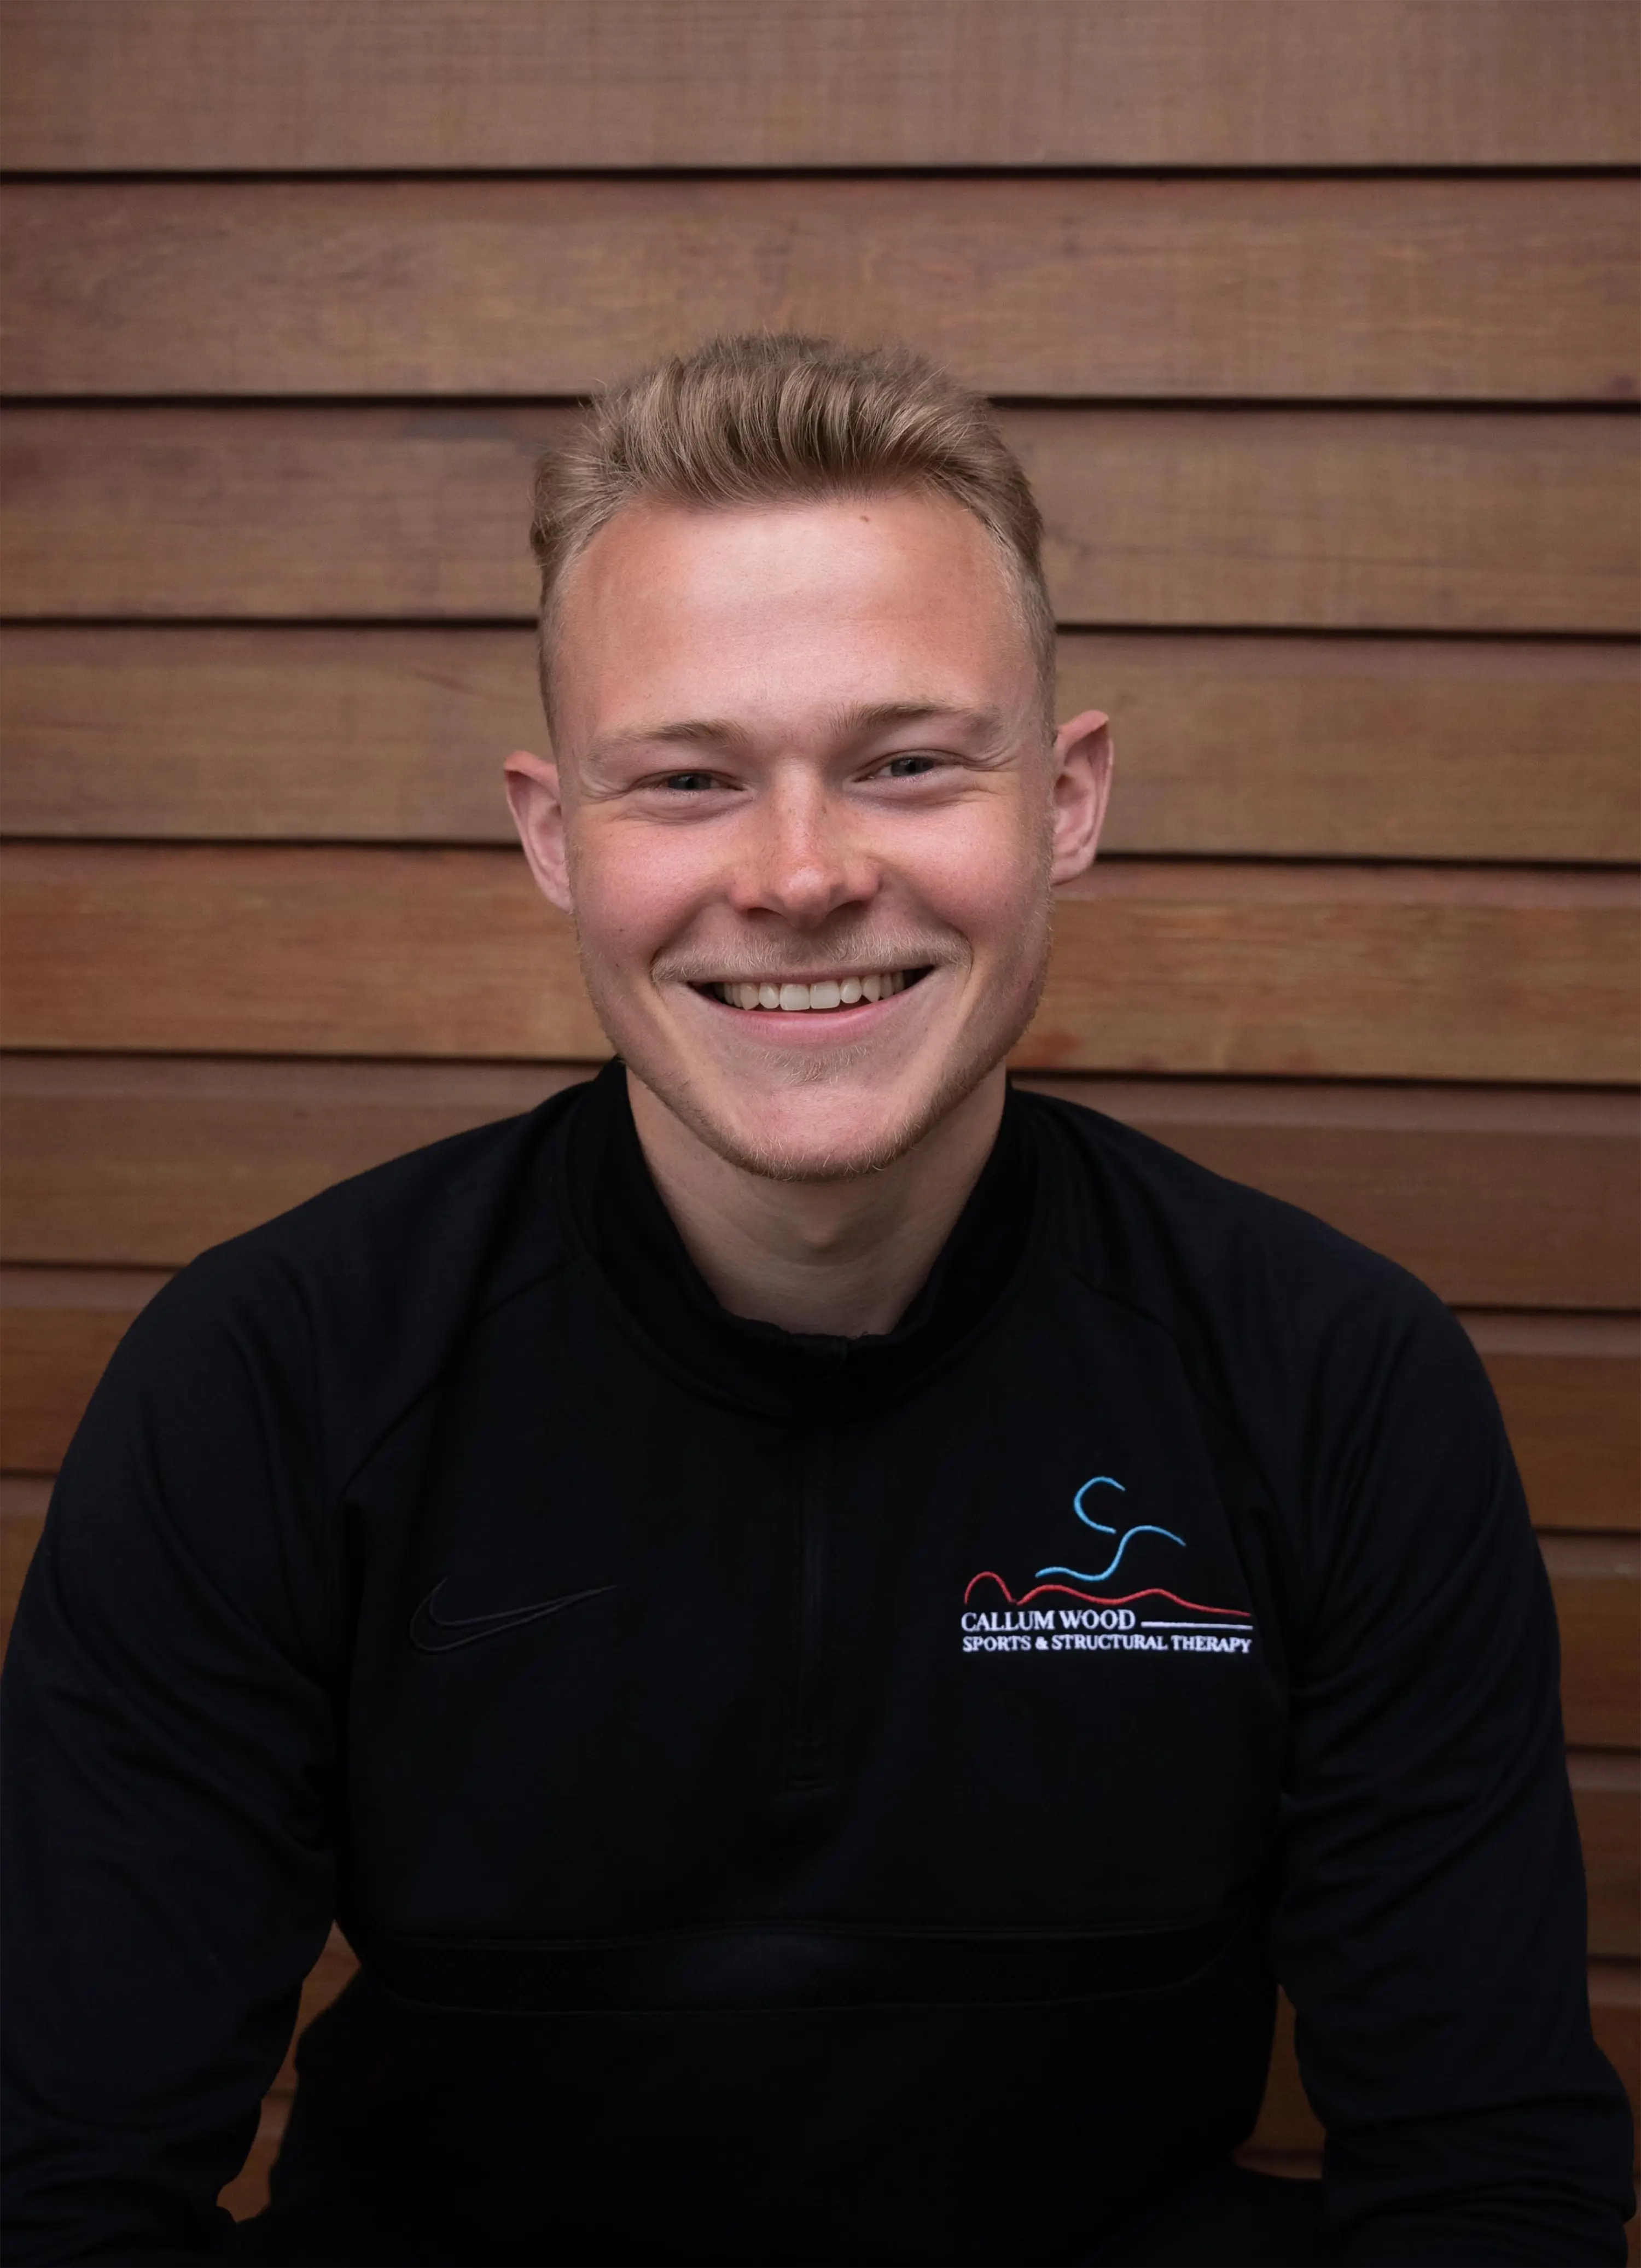 Callum Wood - Callum Wood Sports & Structural Therapy